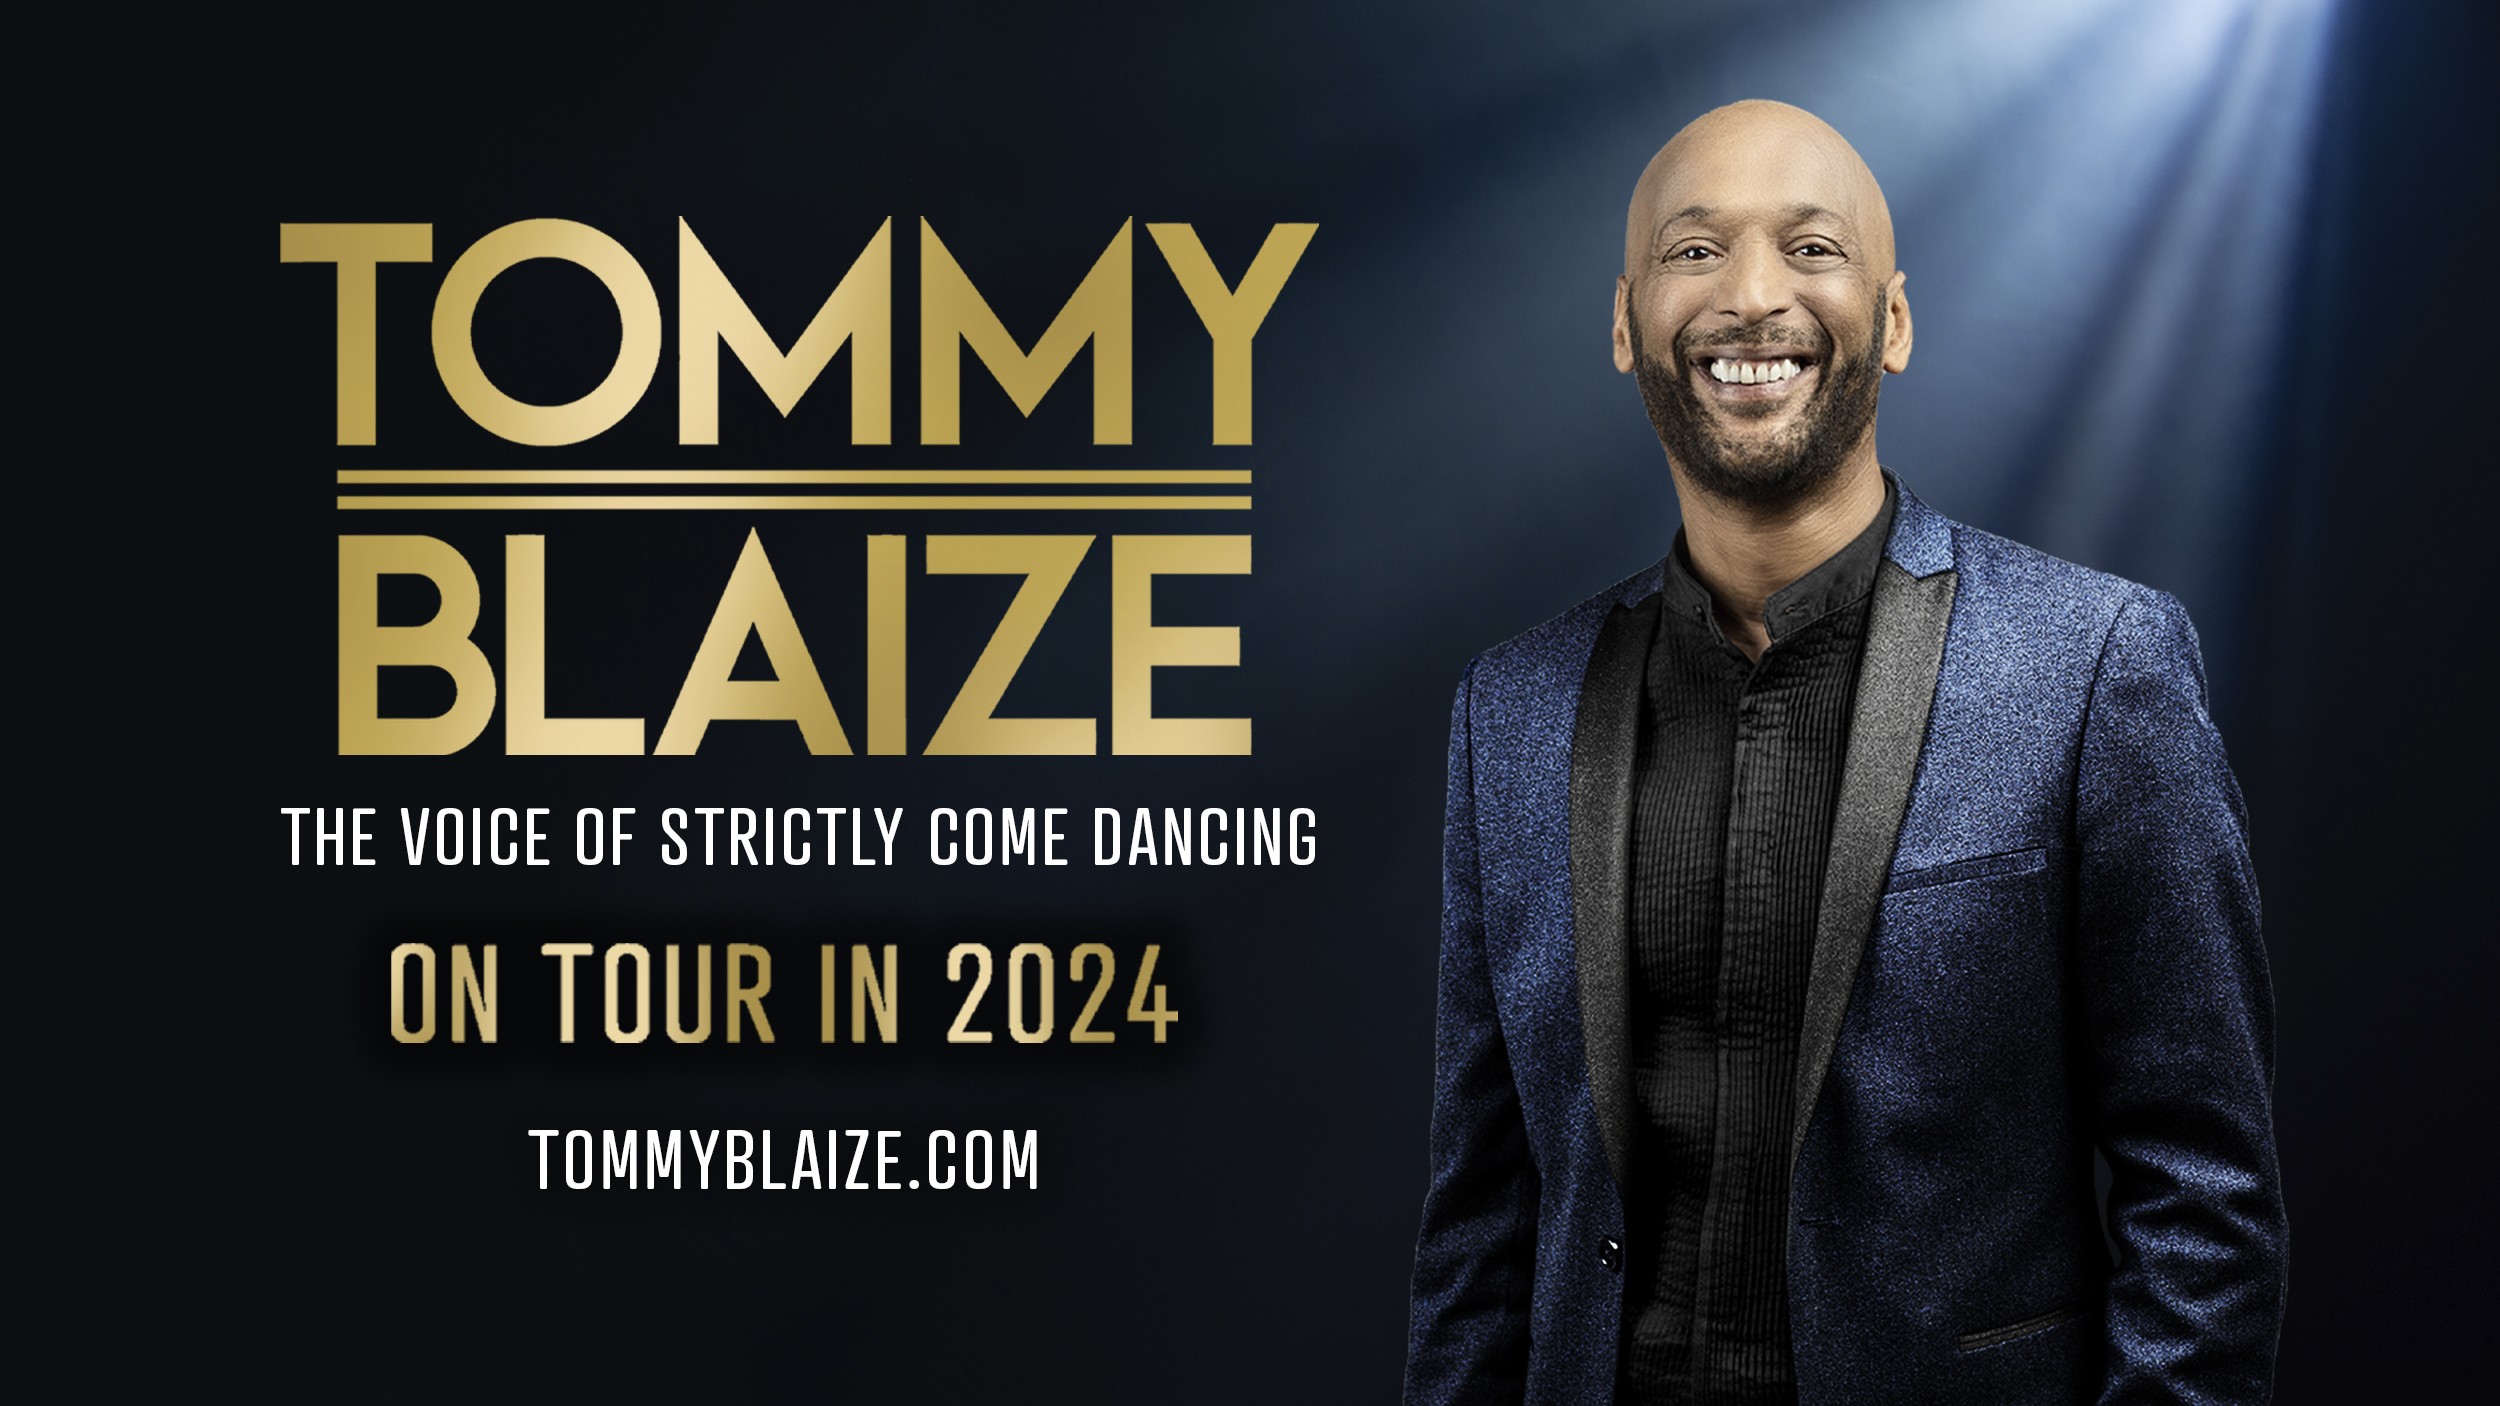 TOMMY BLAIZE - The Voice of Strictly Come Dancing